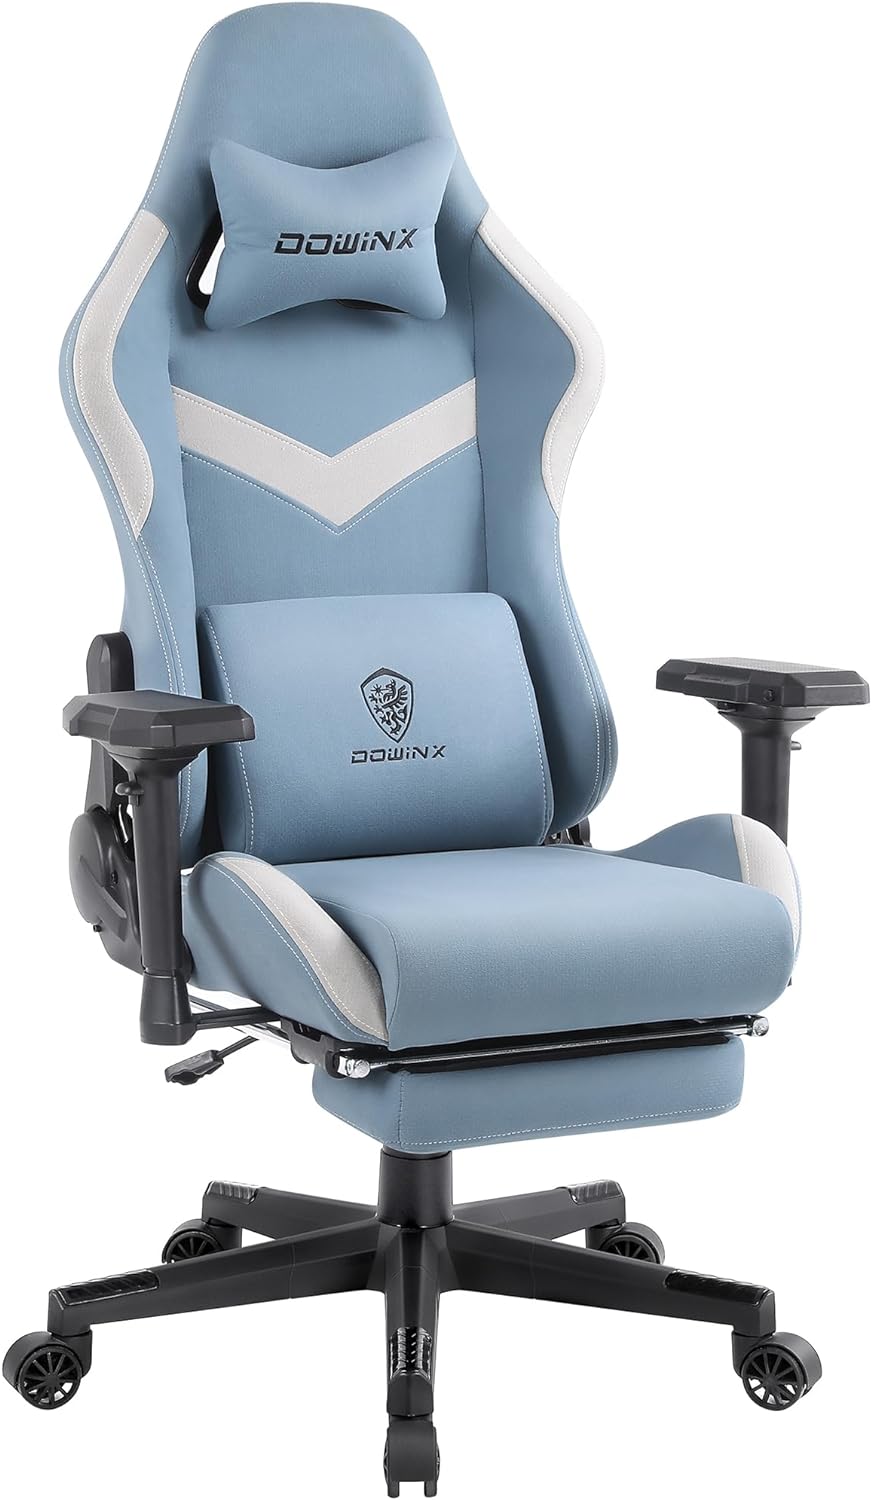 Dowinx Gaming Chair LS-666803 (Blue)4D